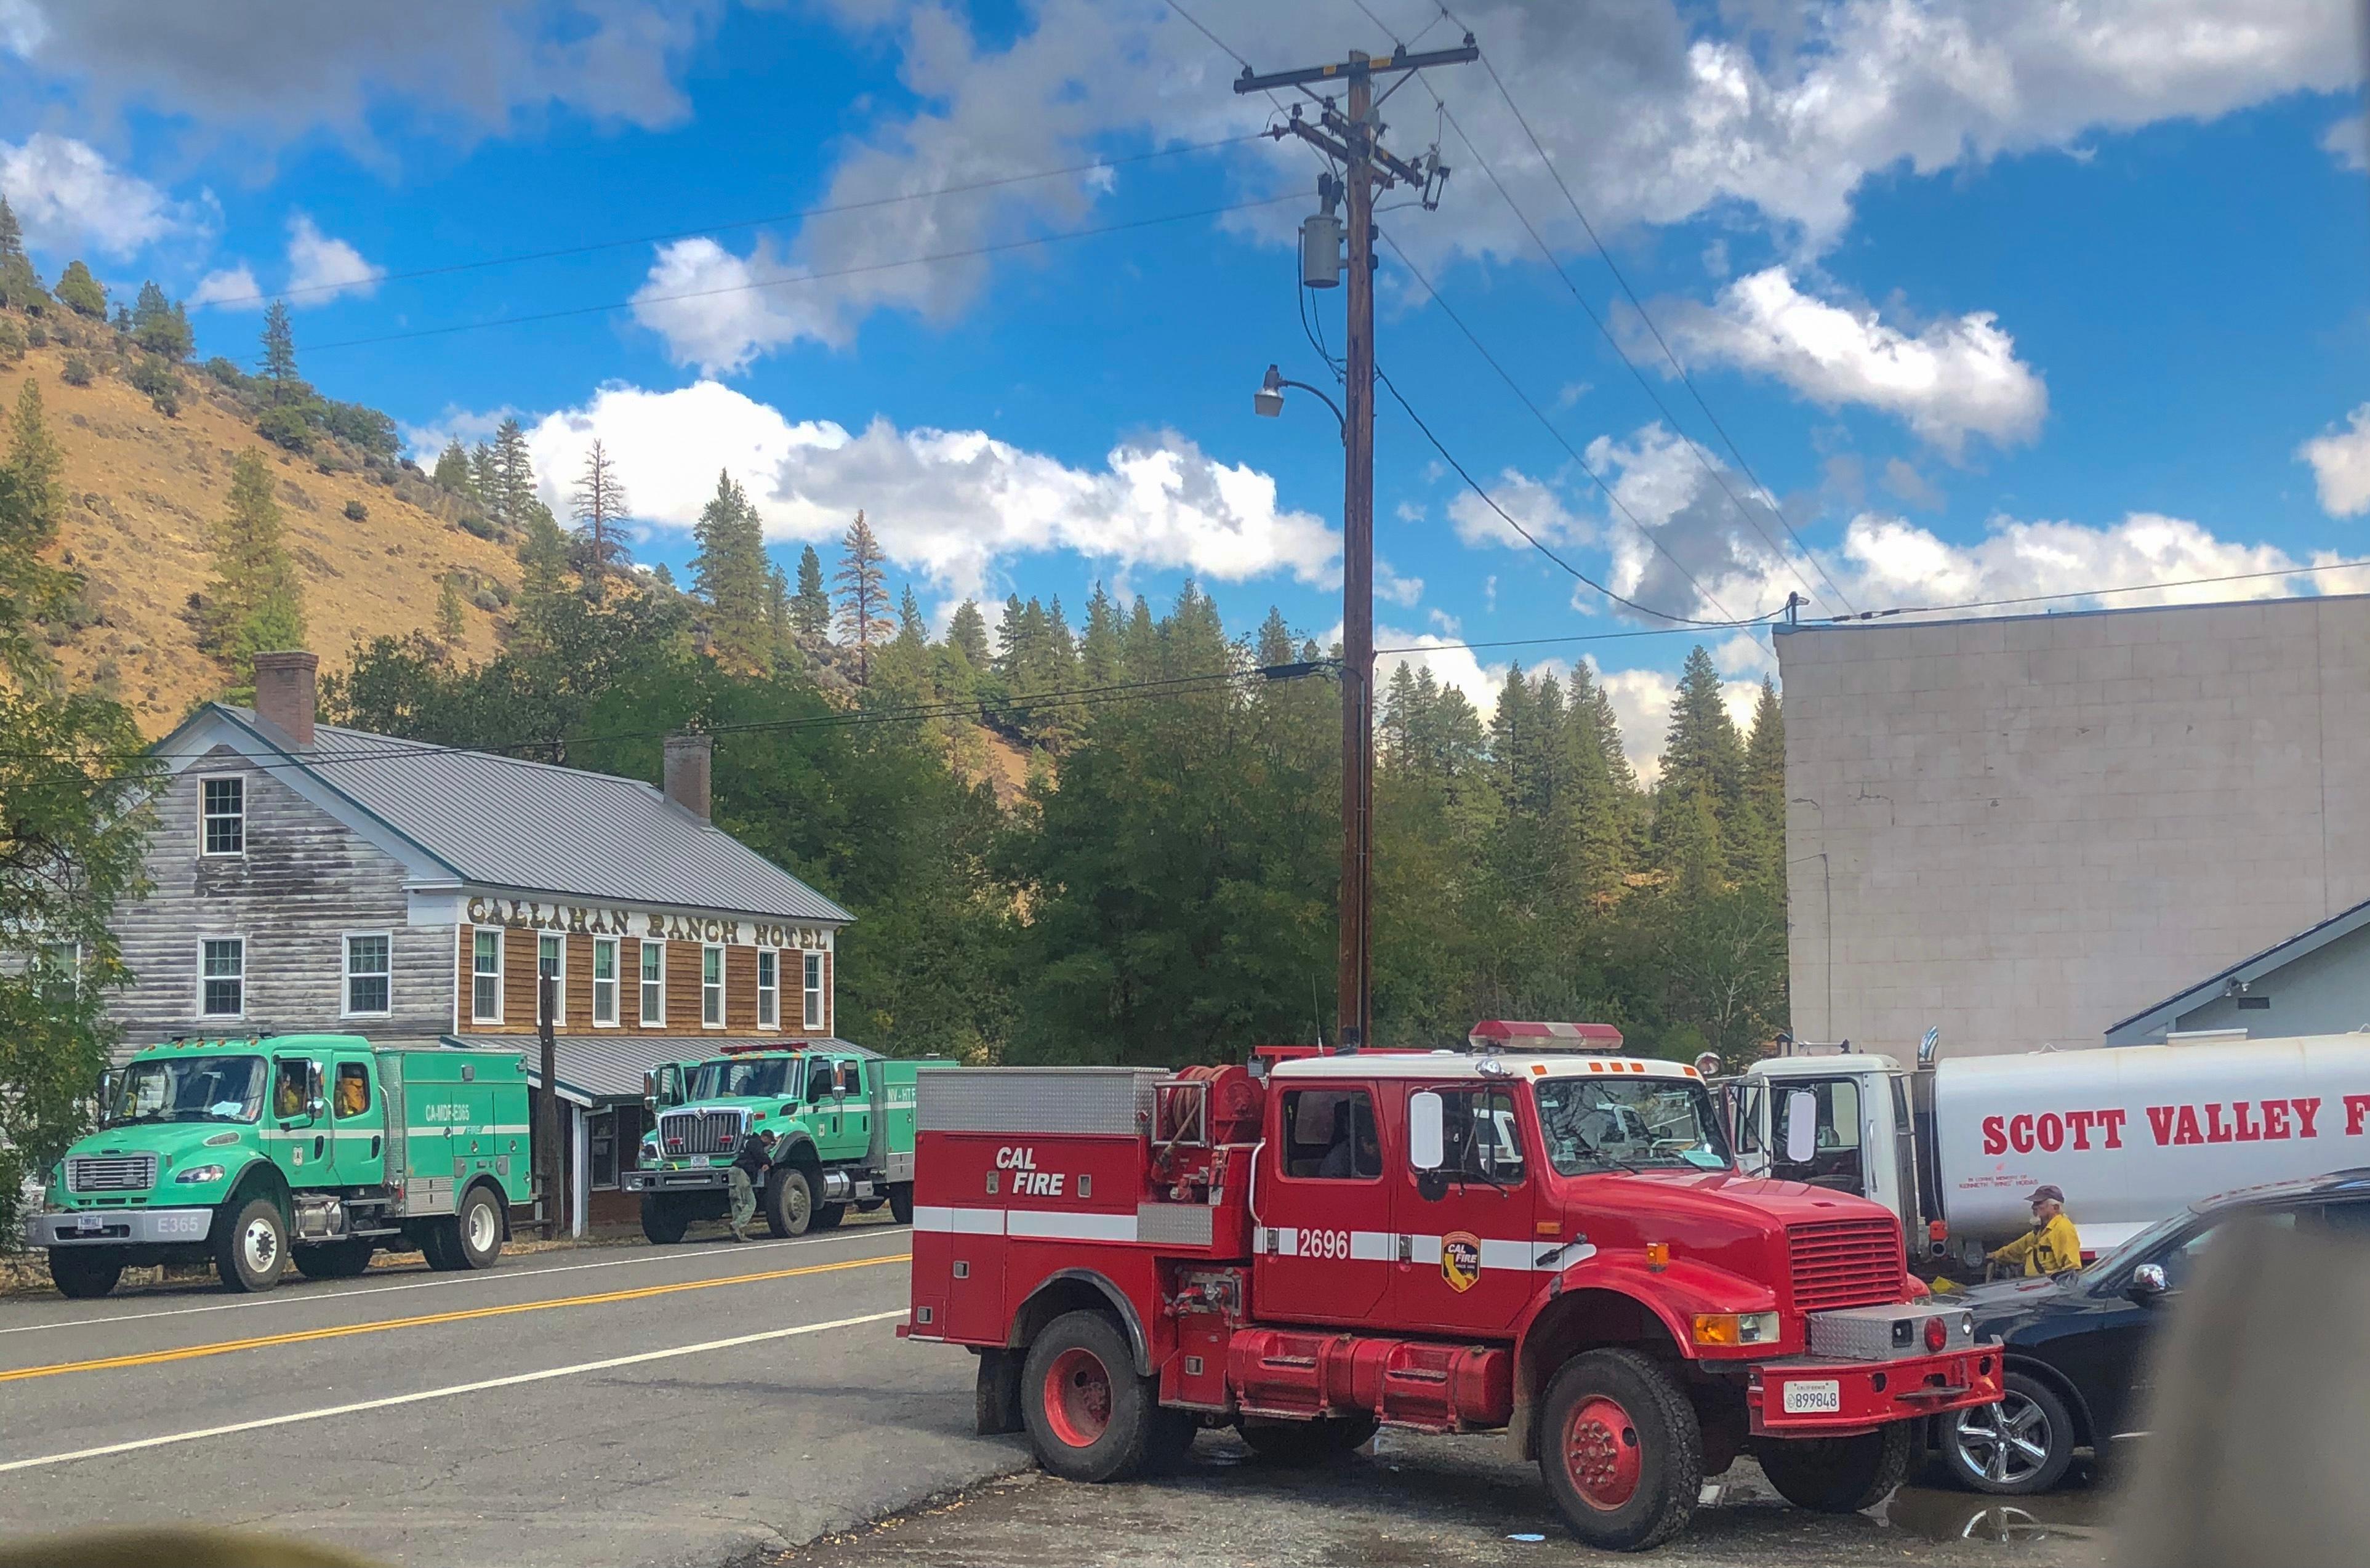 Two Forest Service fire engines, a Cal Fire fire engine, and a Scott Valley fire vehicle.